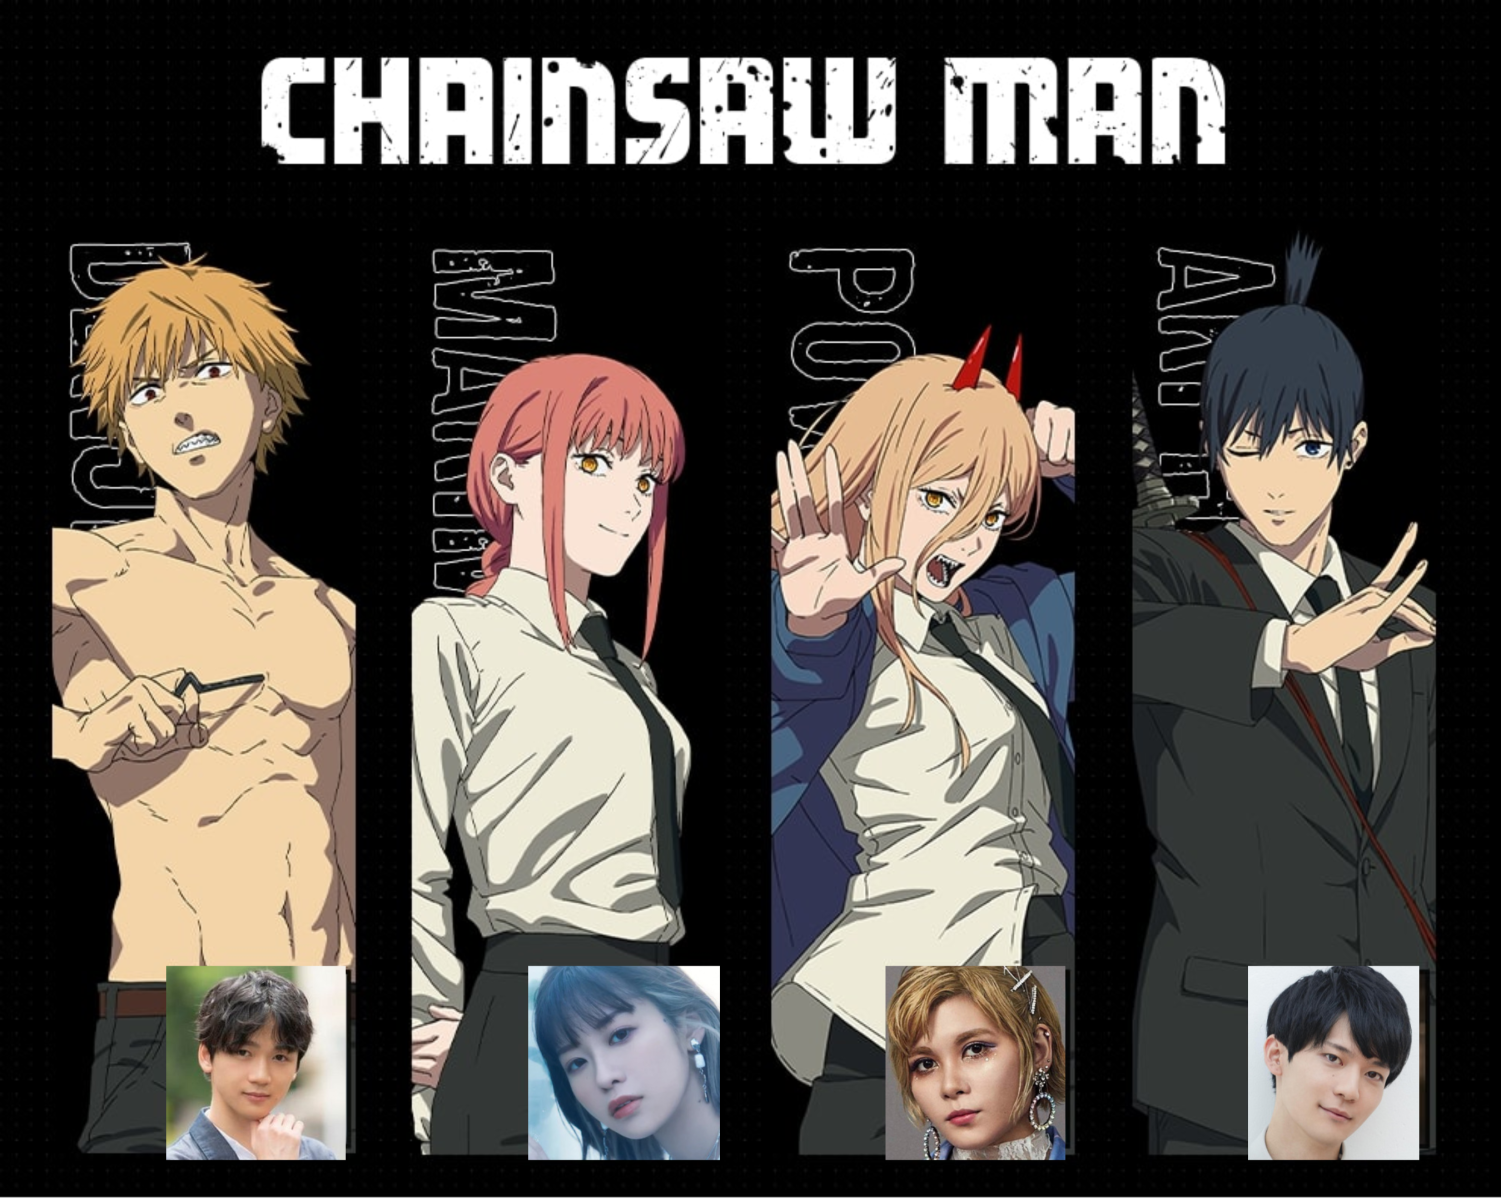 Chainsaw Man Season 1 Review - MAPPA at It's Finest